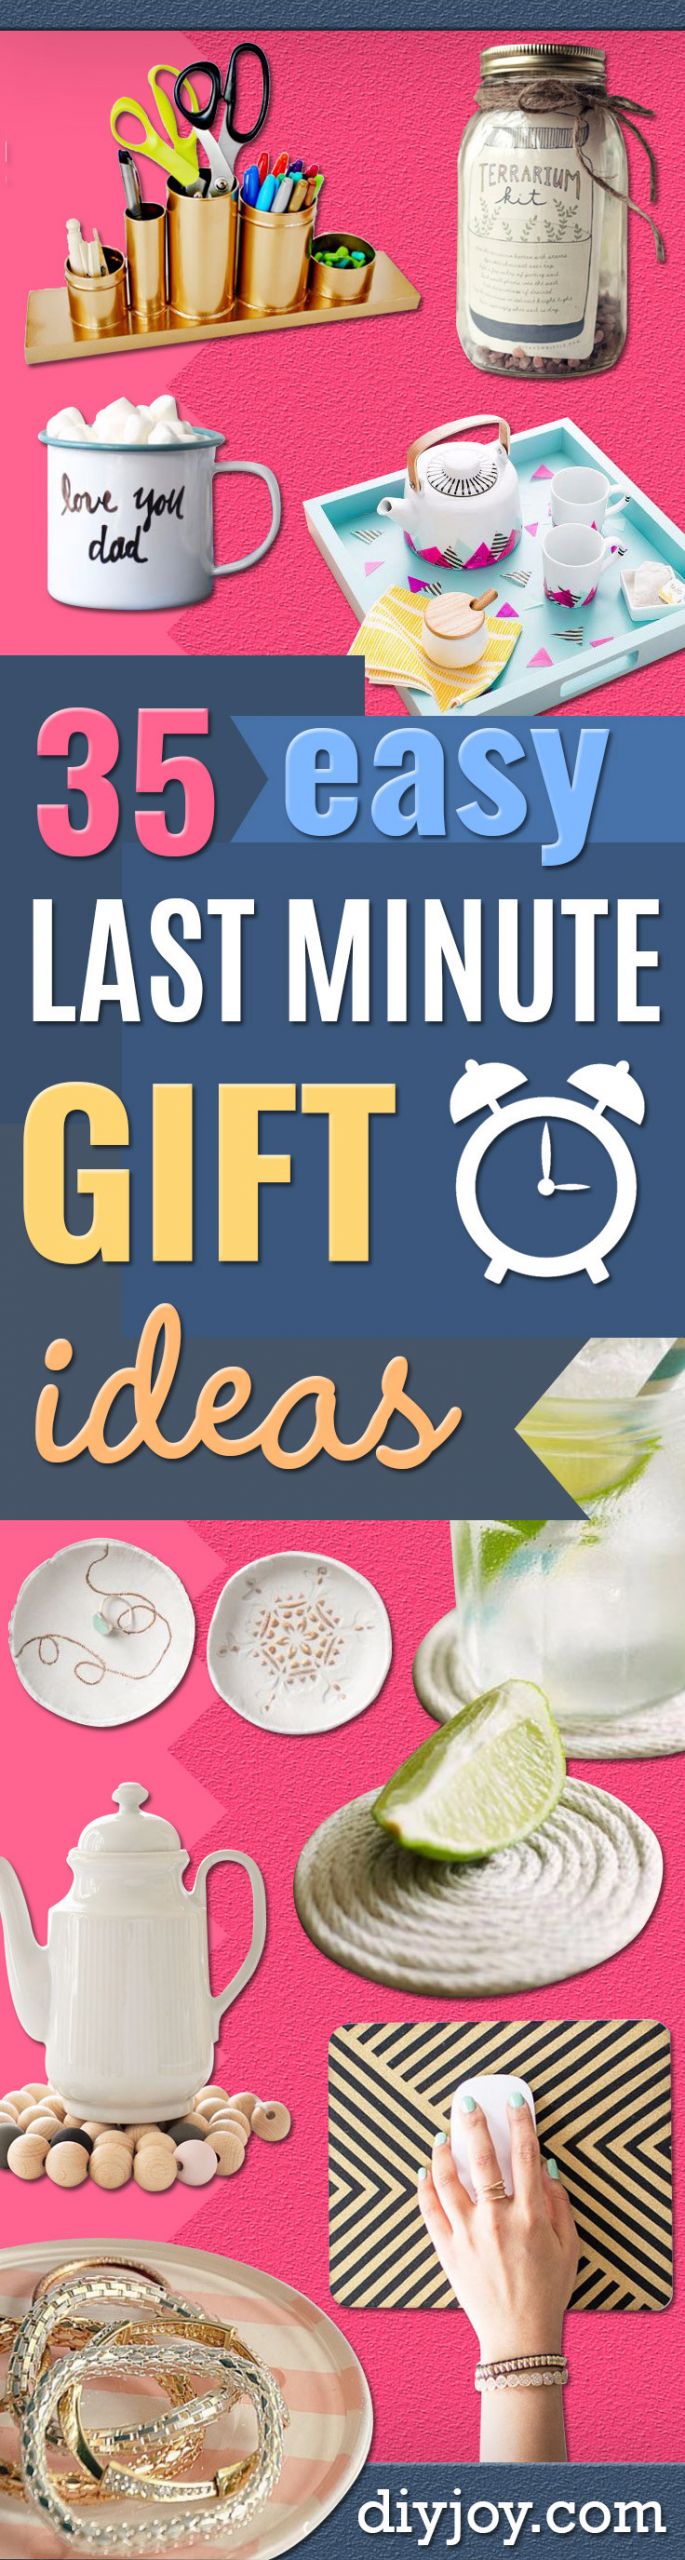 Last Minute DIY Gift Ideas
 35 Awesome Last Minute DIY Gift Ideas